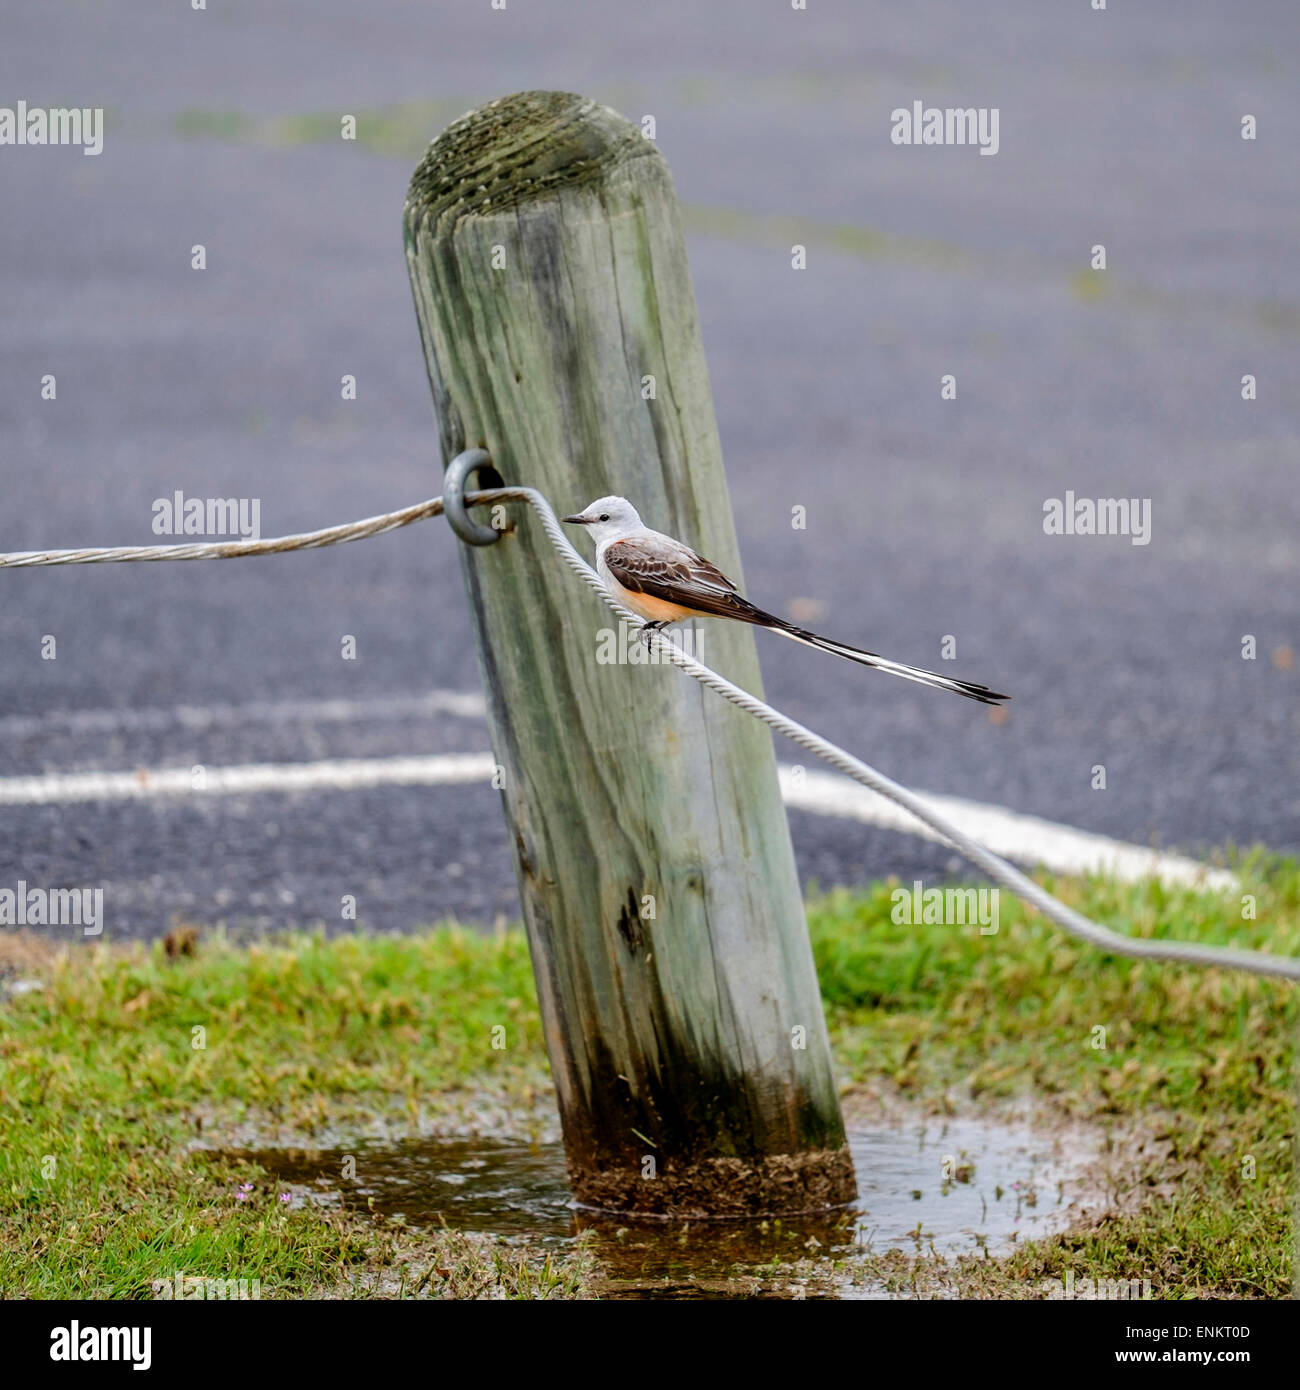 A Scissor-tailed Flycatcher or Tyrannus forficatus, perched on a cable fence. Oklahoma, USA. Stock Photo